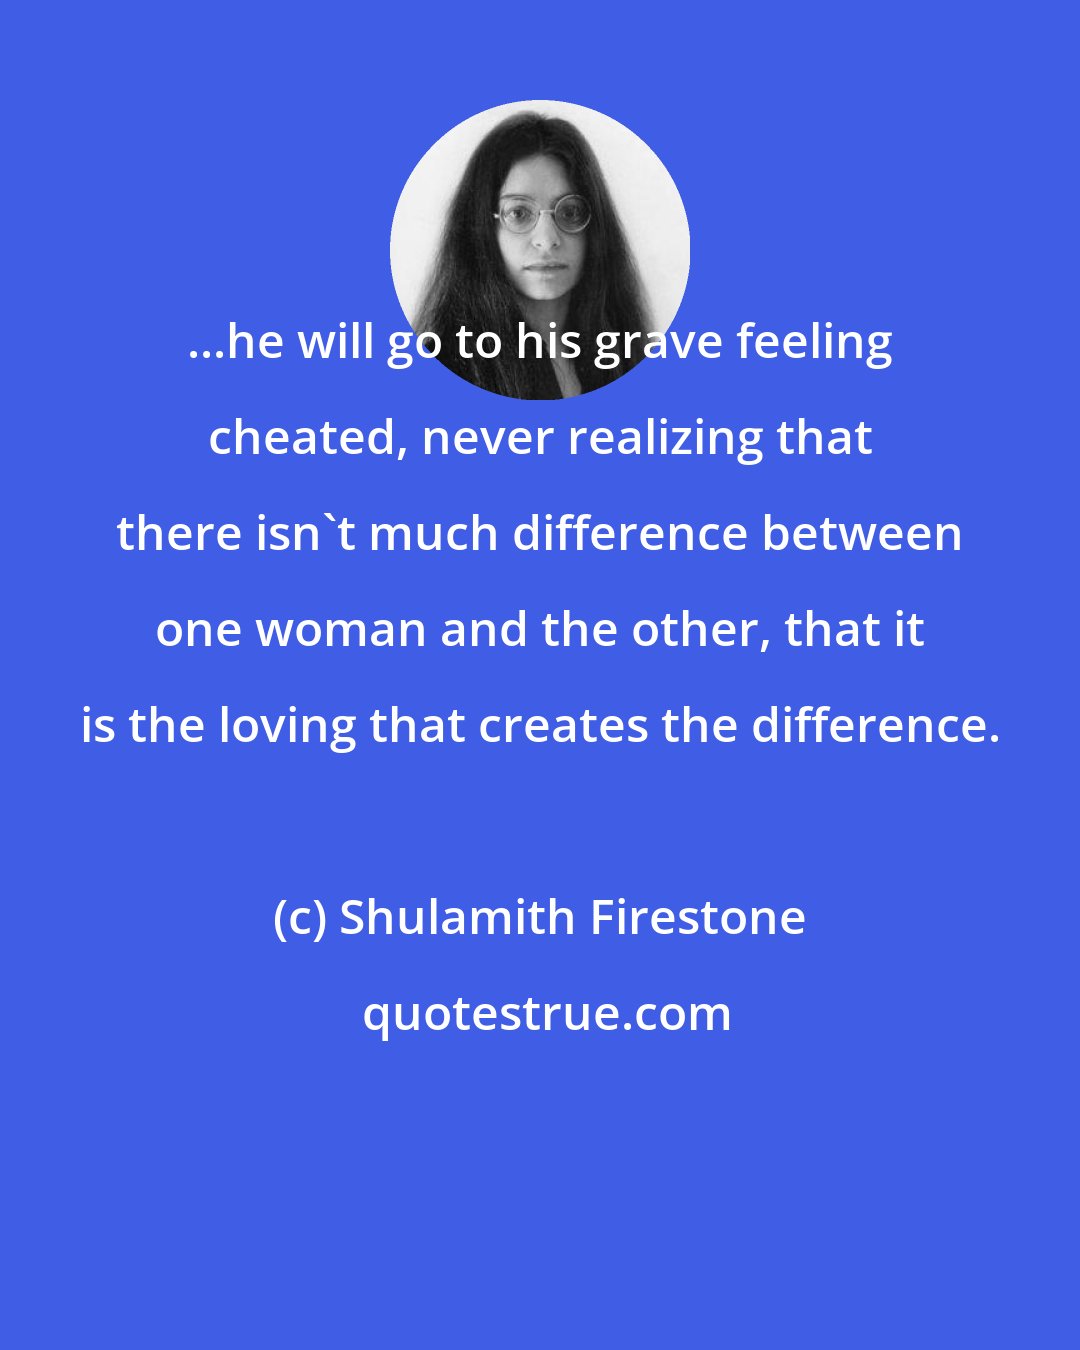 Shulamith Firestone: ...he will go to his grave feeling cheated, never realizing that there isn't much difference between one woman and the other, that it is the loving that creates the difference.